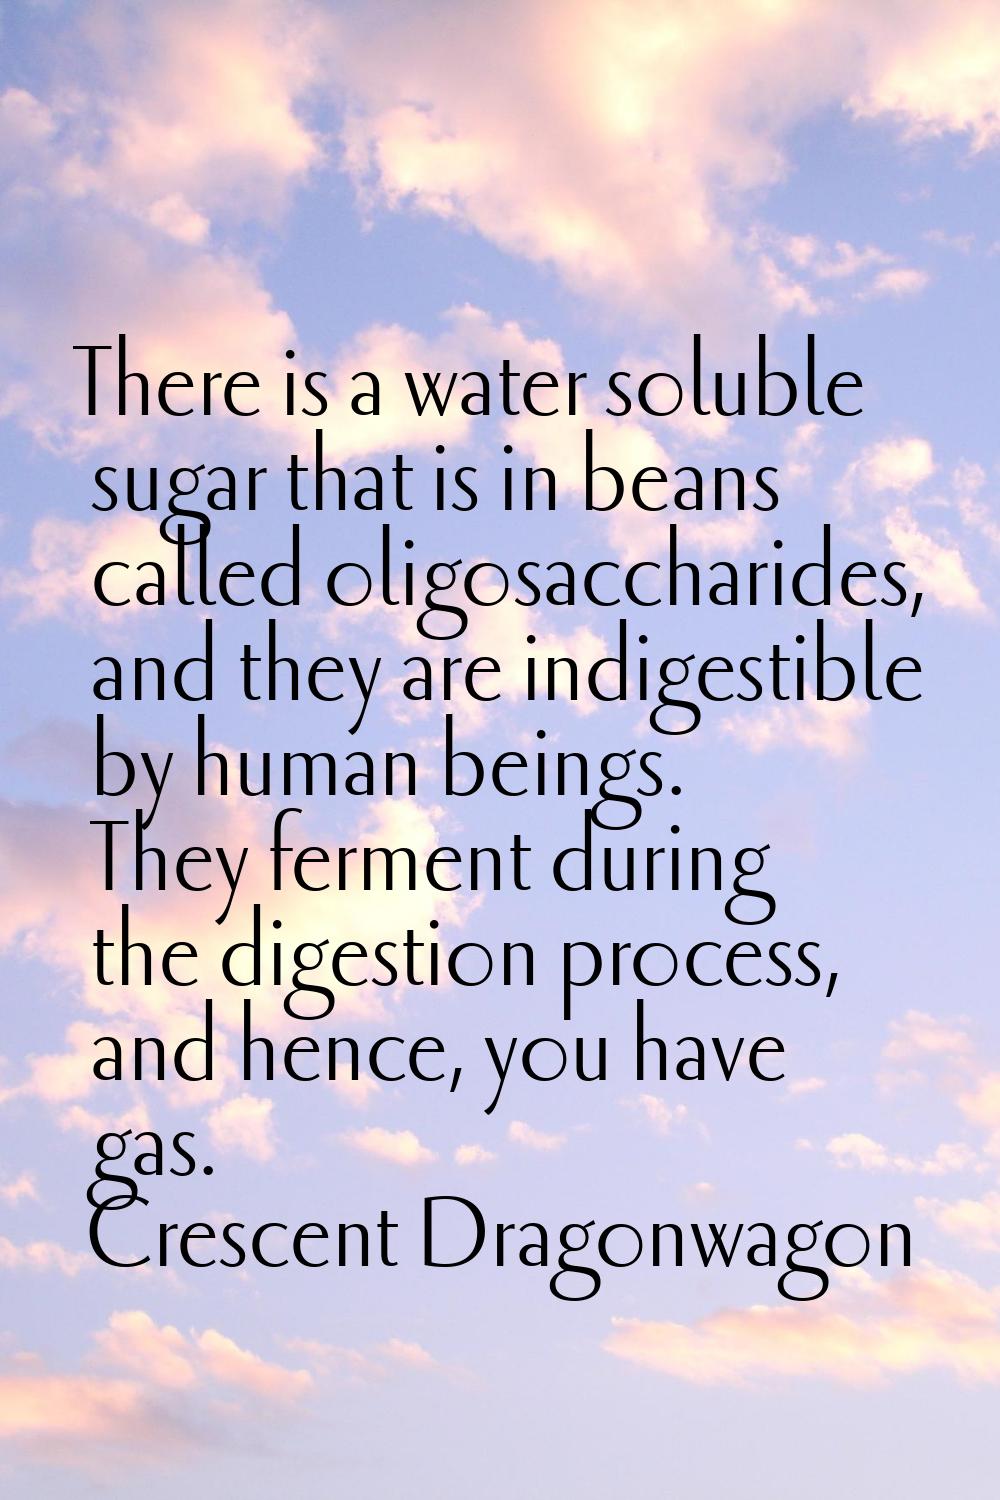 There is a water soluble sugar that is in beans called oligosaccharides, and they are indigestible 